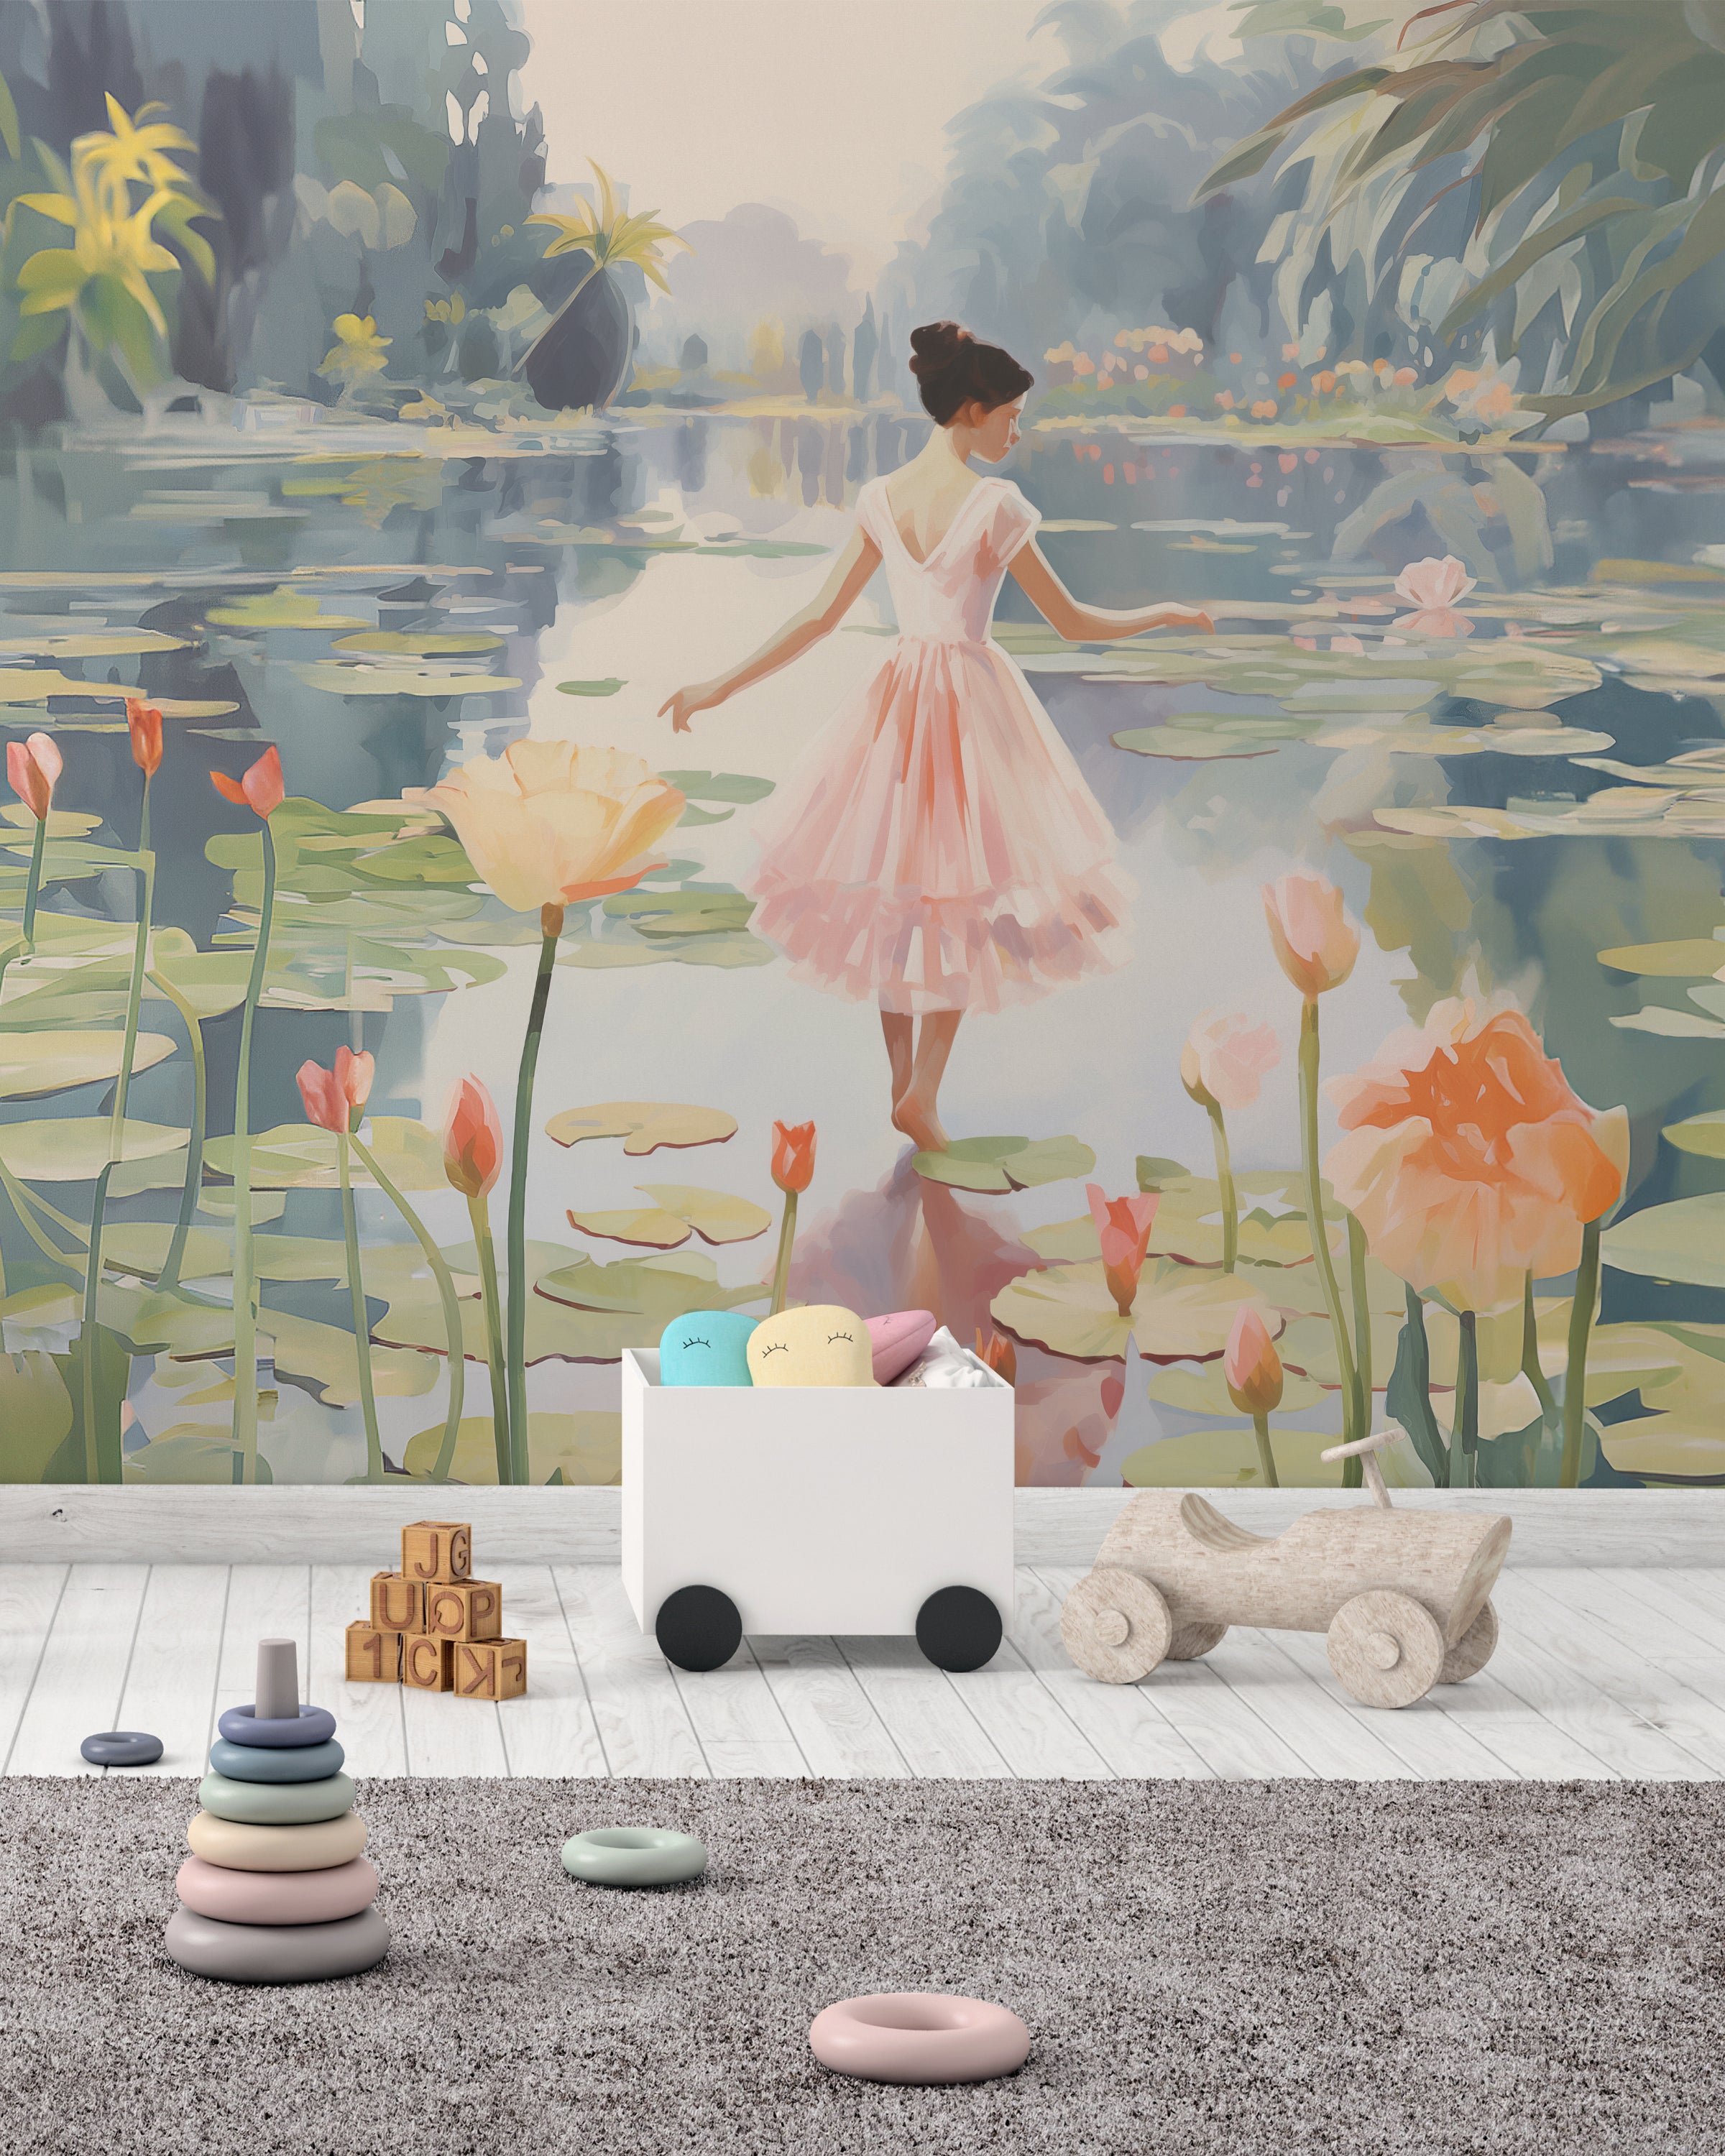 Children's room showcasing the Dancing Lily Mural along one wall, with a scene of a girl and lily pads, accompanied by modern kid’s furniture and playful decorations.